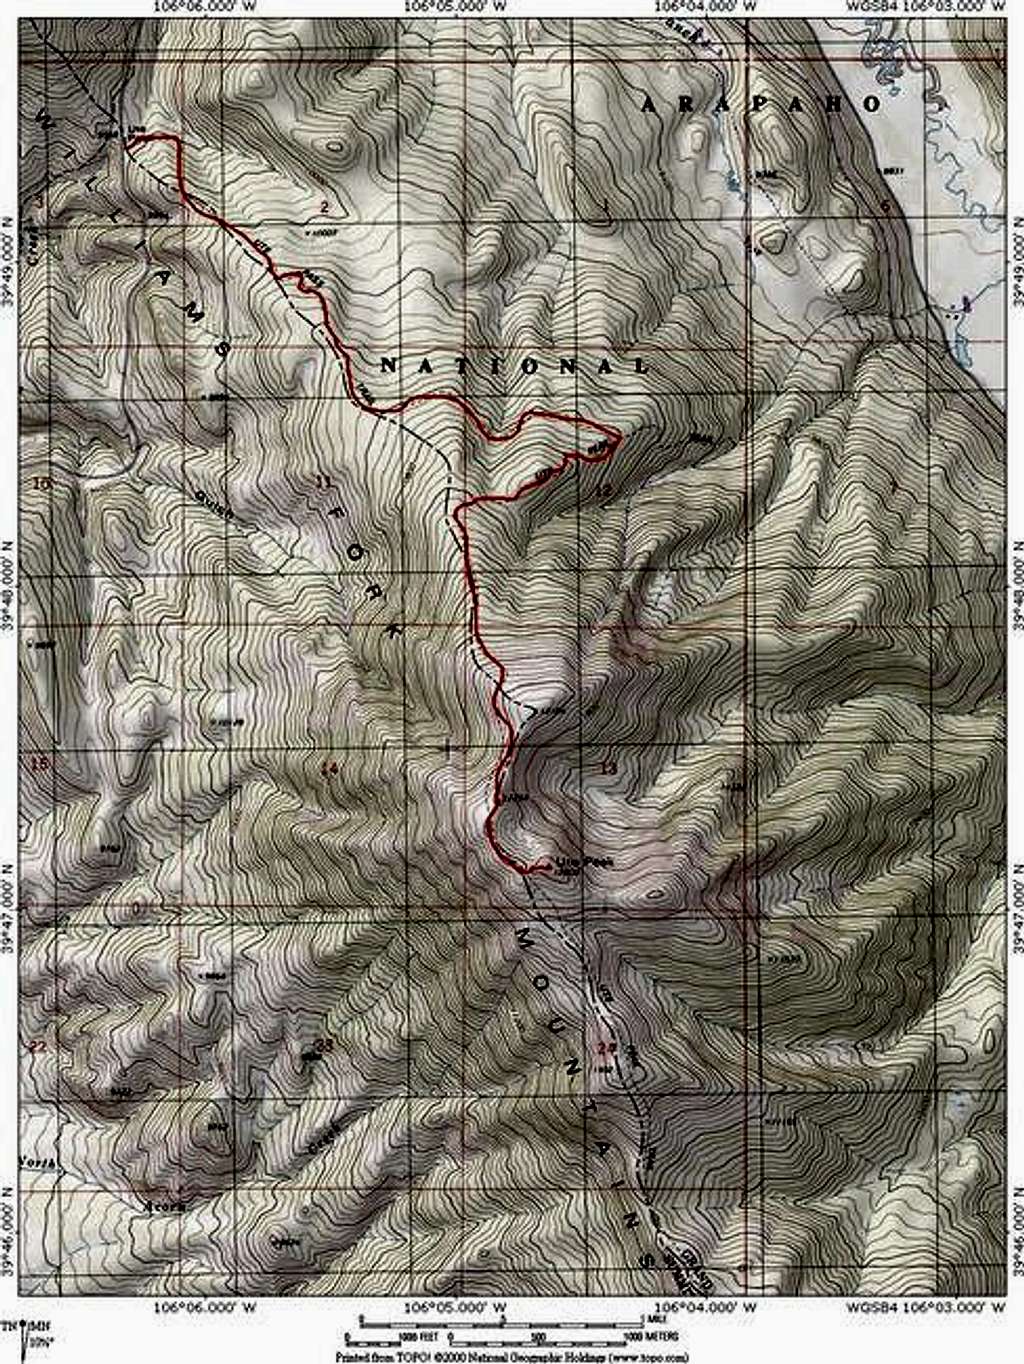 The route on Ute Peak from...